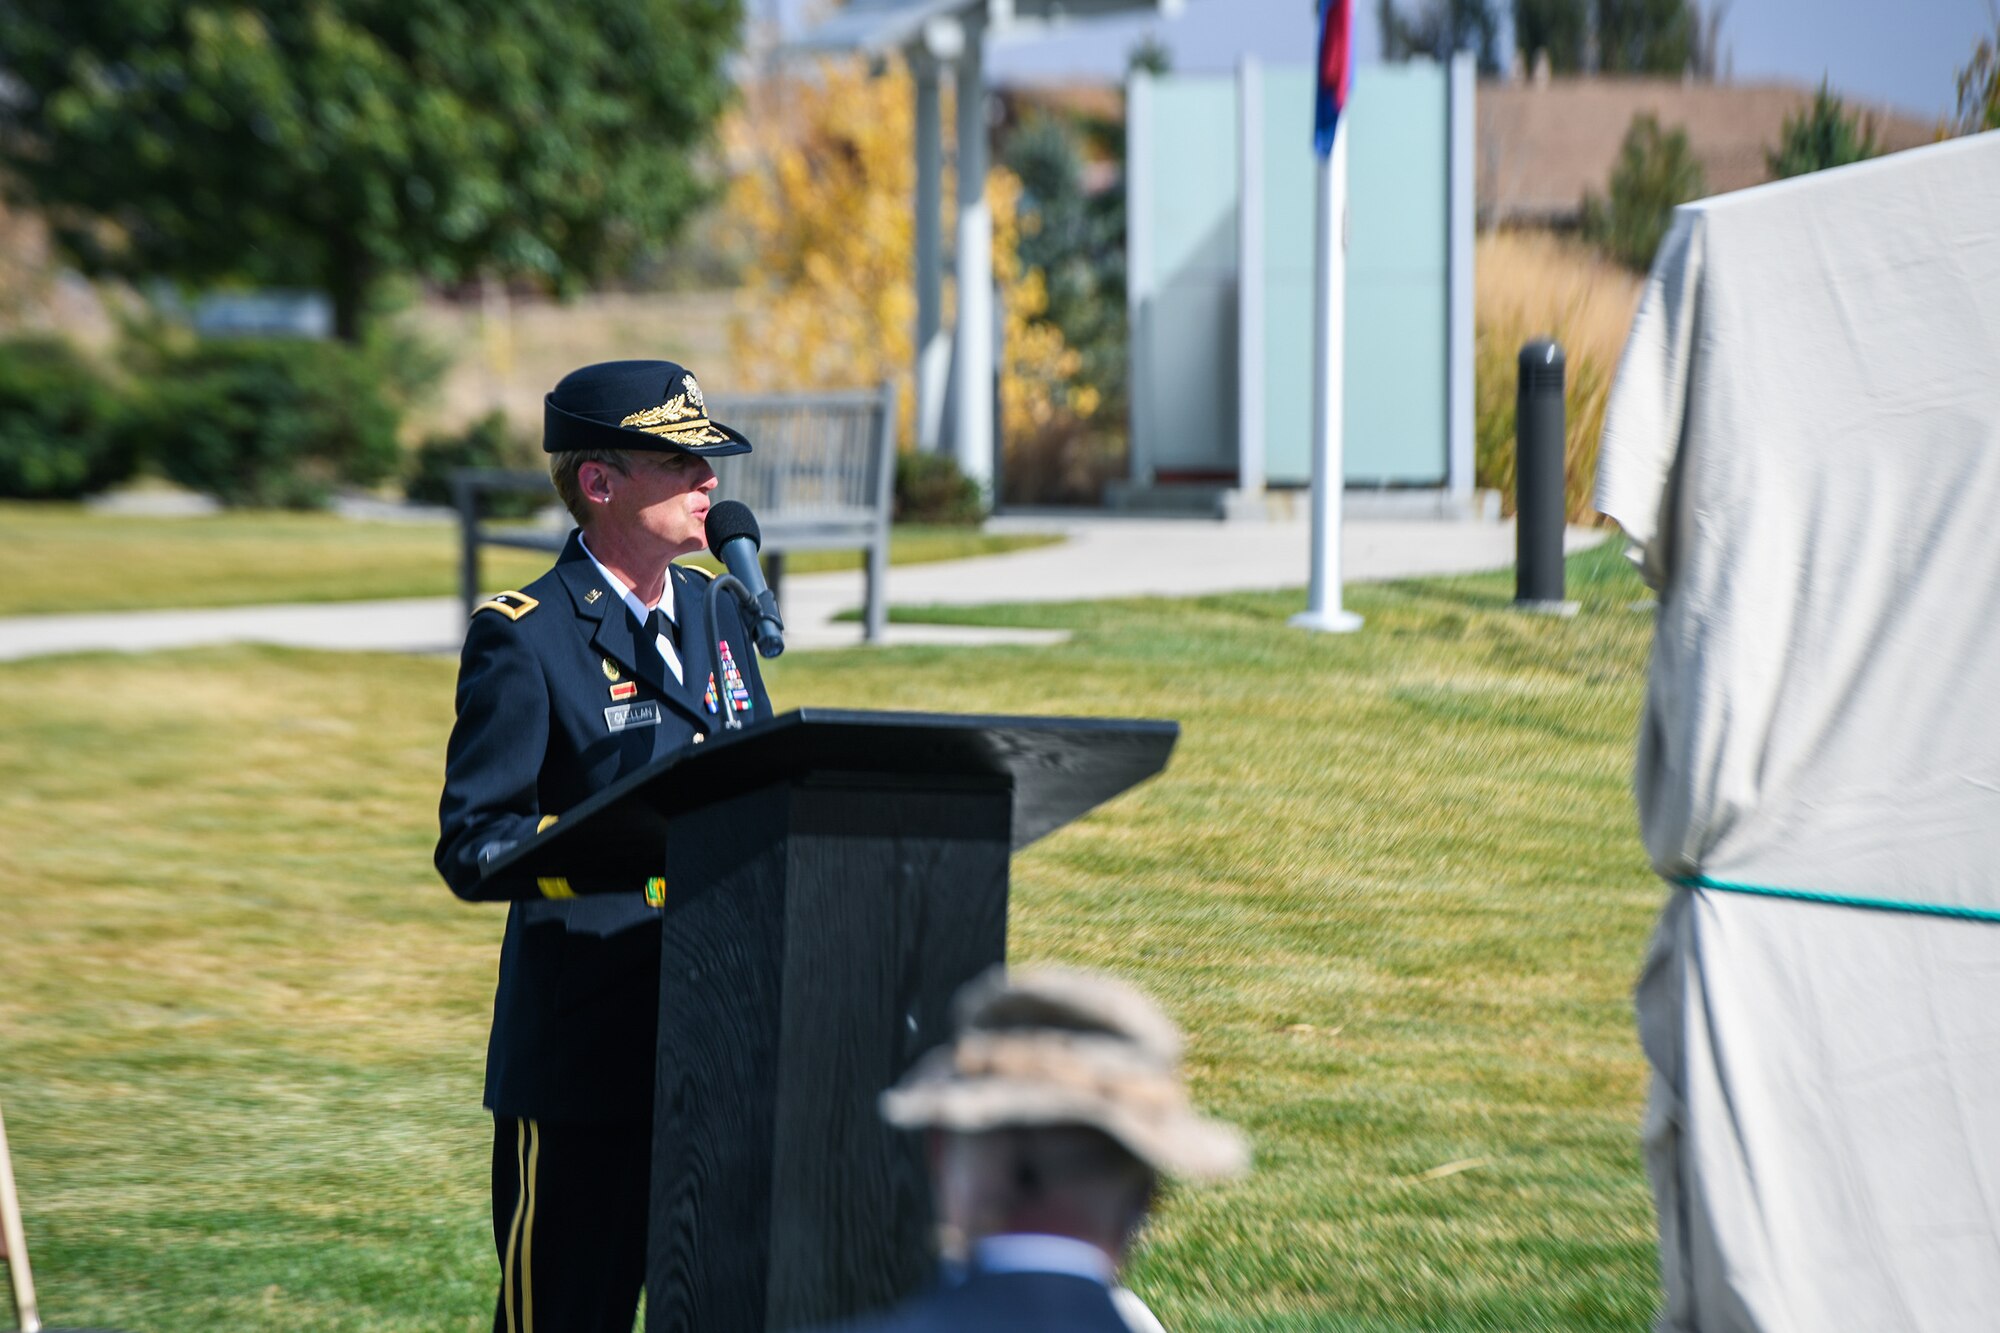 U.S. Army Brig. Gen. Laura Clellan, the Adjutant General of Colorado, gives a speech before the unveiling of the Gold Star Families Memorial Monument Oct. 14, 2020, at the Colorado Freedom Memorial in Aurora, Colo.